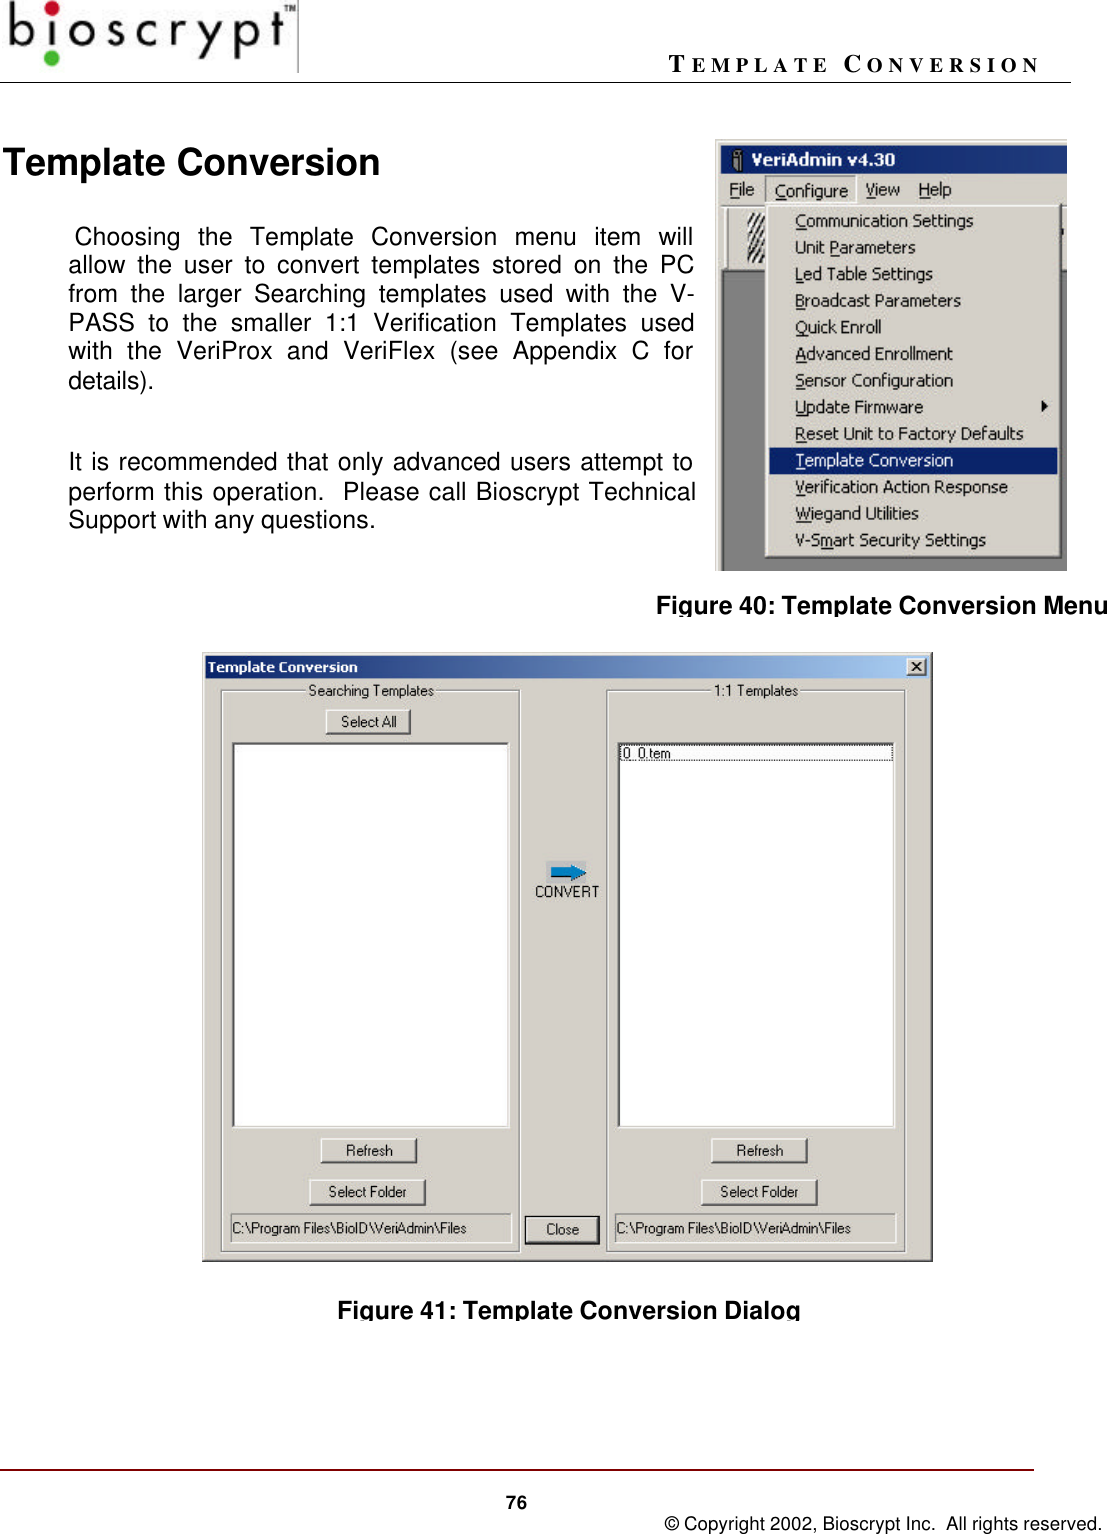 TEMPLATE CONVERSION76 © Copyright 2002, Bioscrypt Inc.  All rights reserved.Template Conversion Choosing the Template Conversion menu item willallow the user to convert templates stored on the PCfrom the larger Searching templates used with the V-PASS to the smaller 1:1 Verification Templates usedwith the VeriProx and VeriFlex (see Appendix C fordetails).It is recommended that only advanced users attempt toperform this operation.  Please call Bioscrypt TechnicalSupport with any questions.Figure 40: Template Conversion MenuFigure 41: Template Conversion Dialog